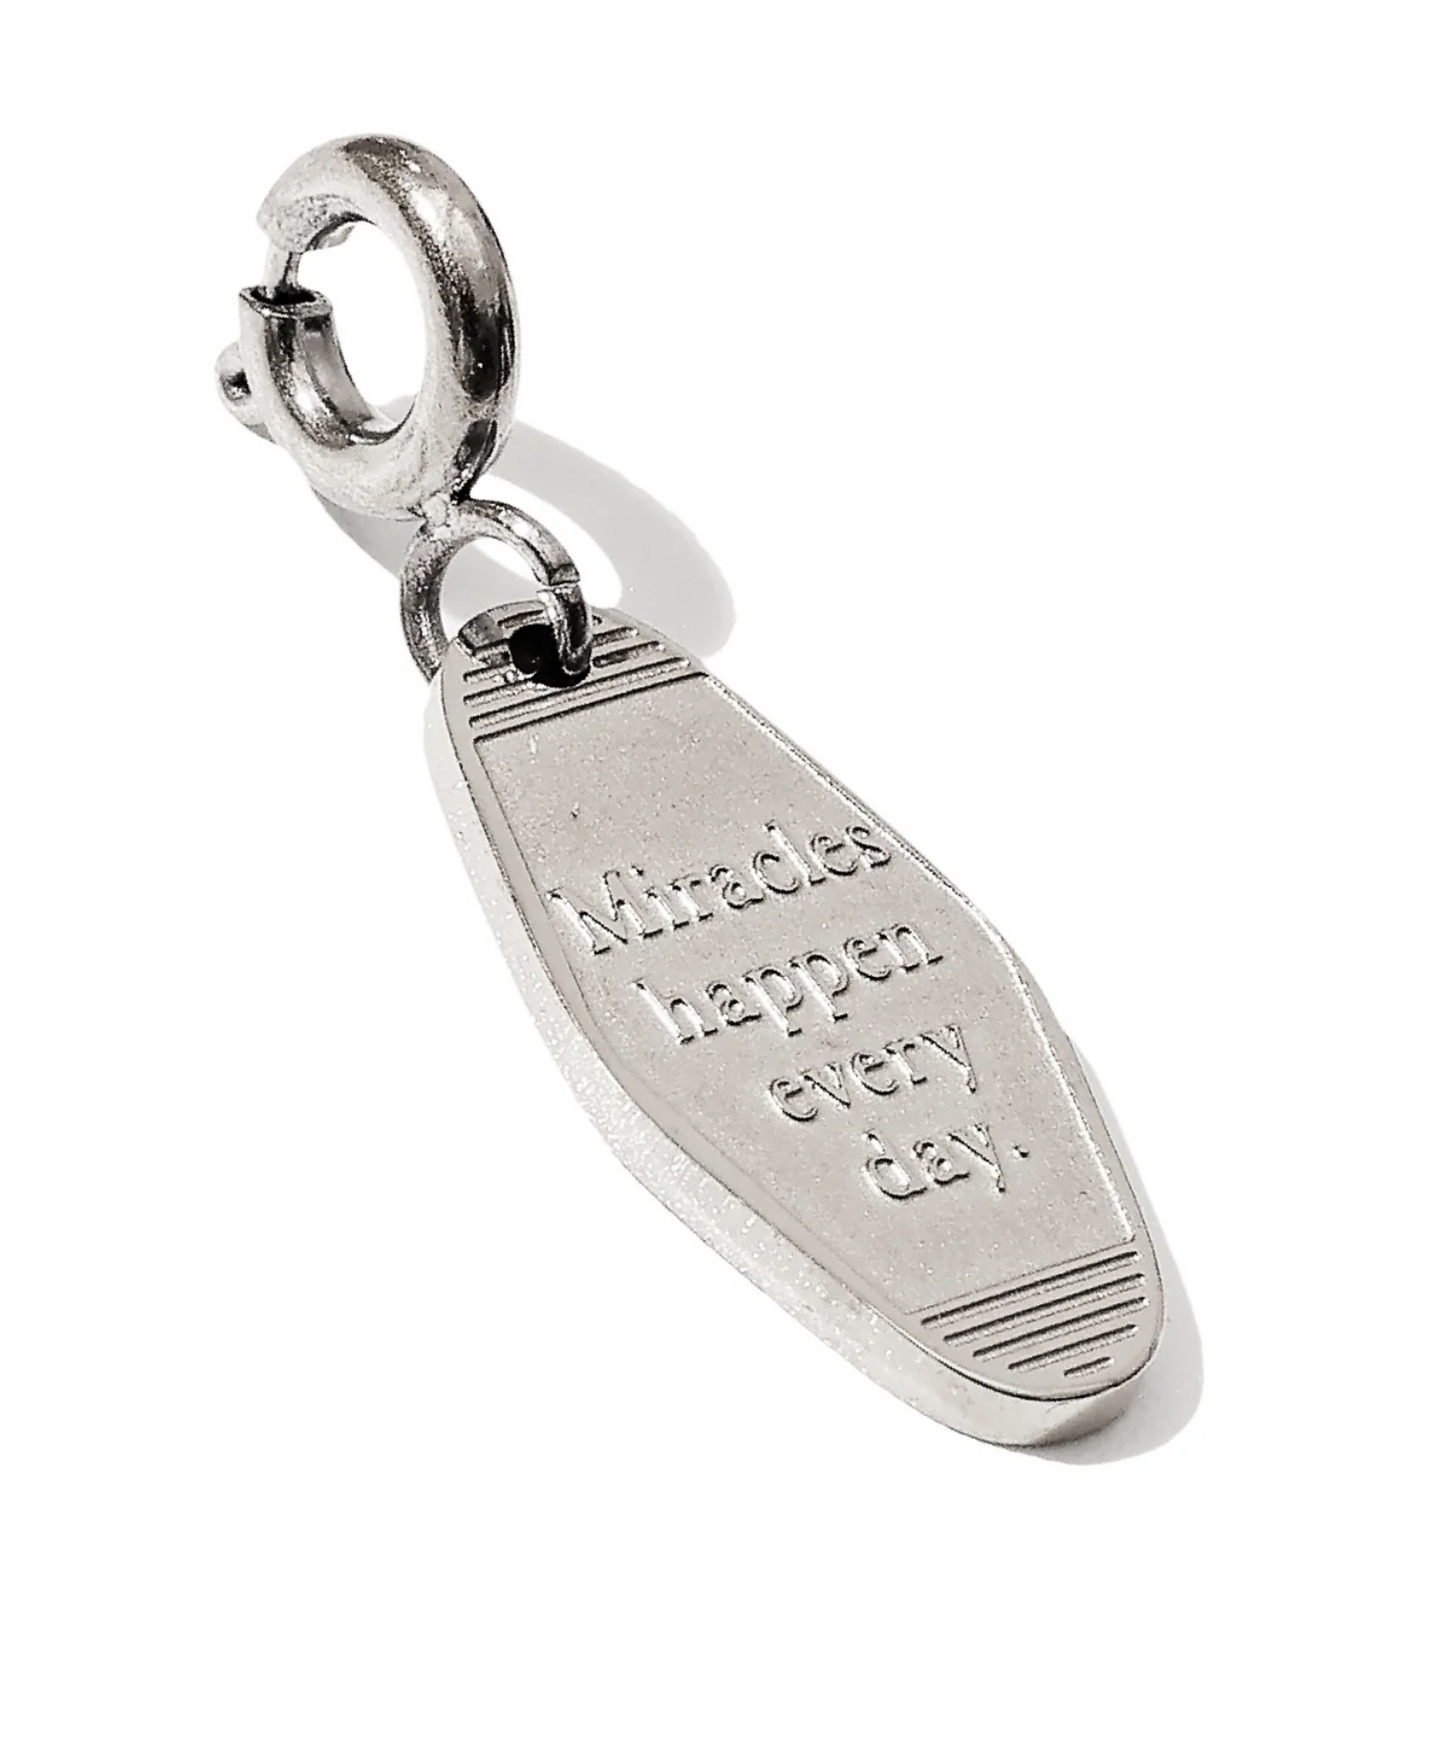 Matter Matters 'Miracles Happen Everyday' Key Tag Pendant • Steel